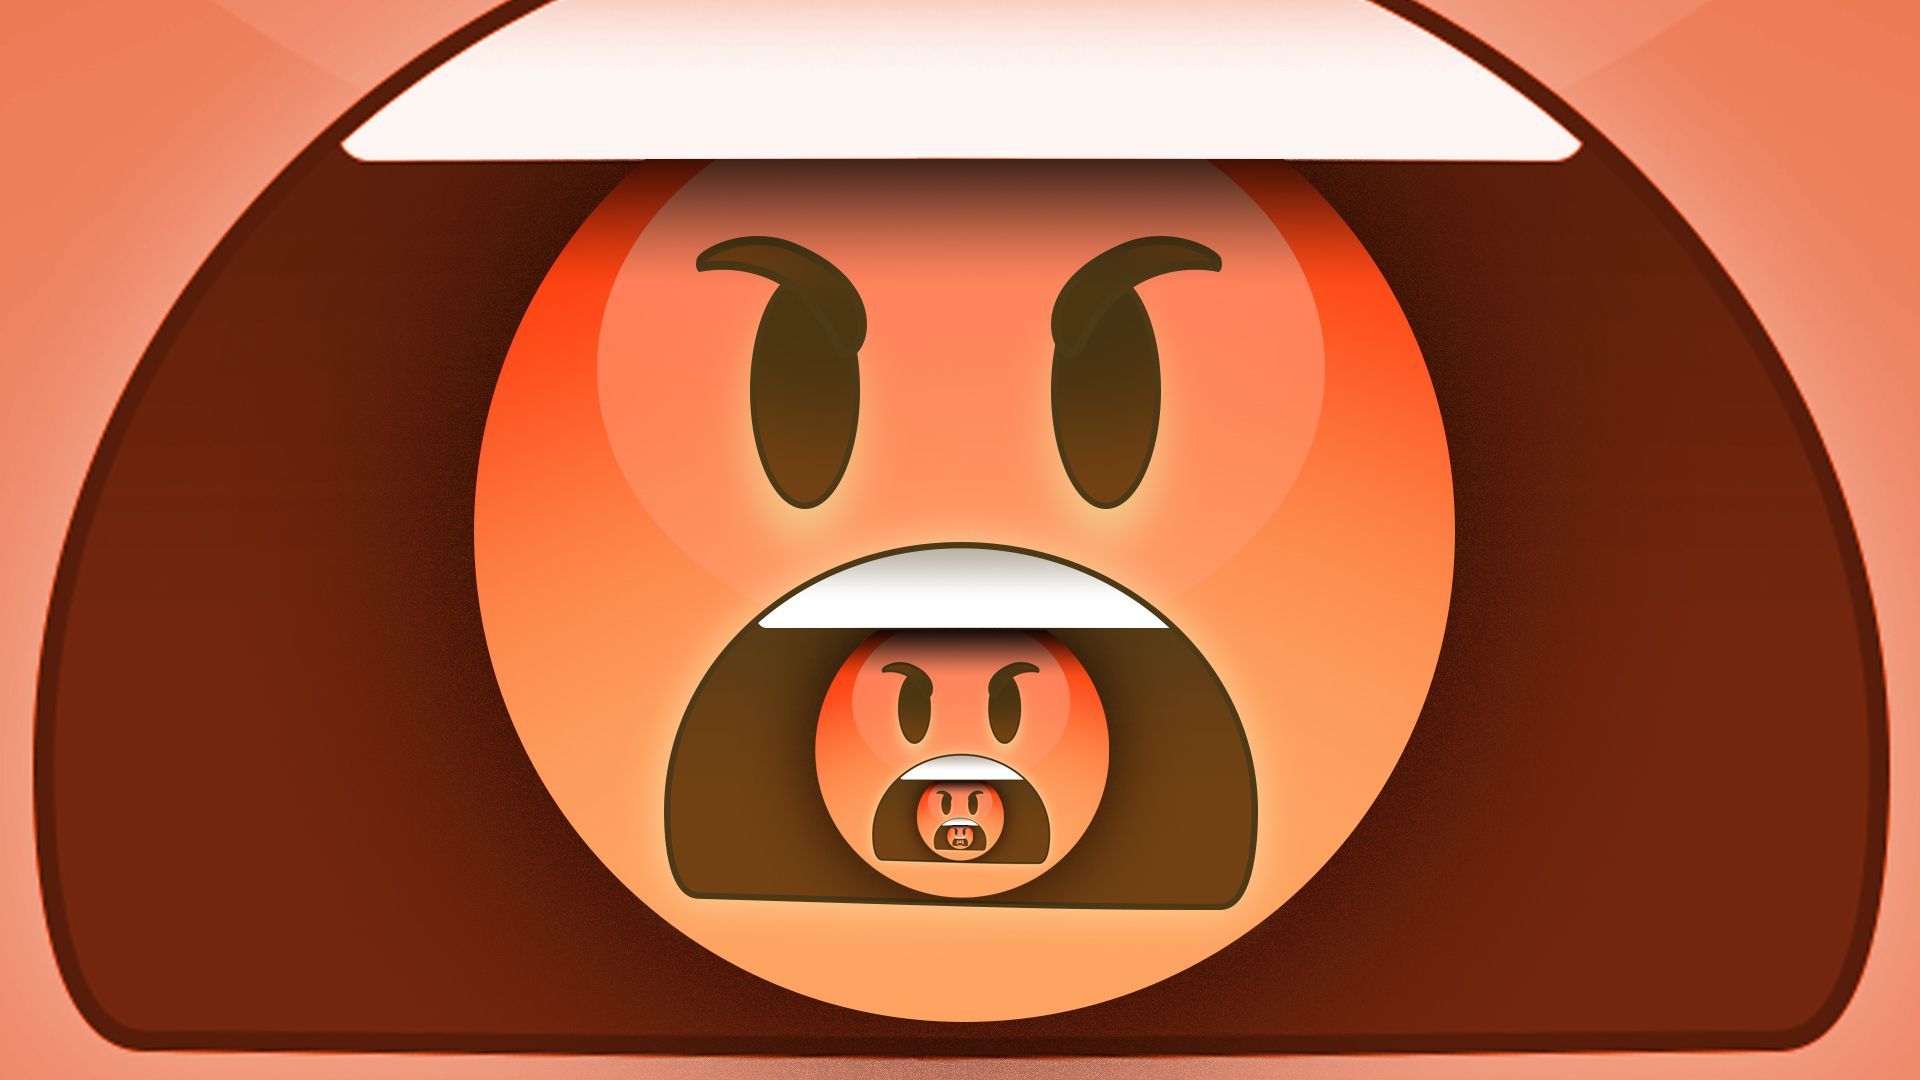 Illustration of a series of angry emojis emerging from one another's yelling mouth